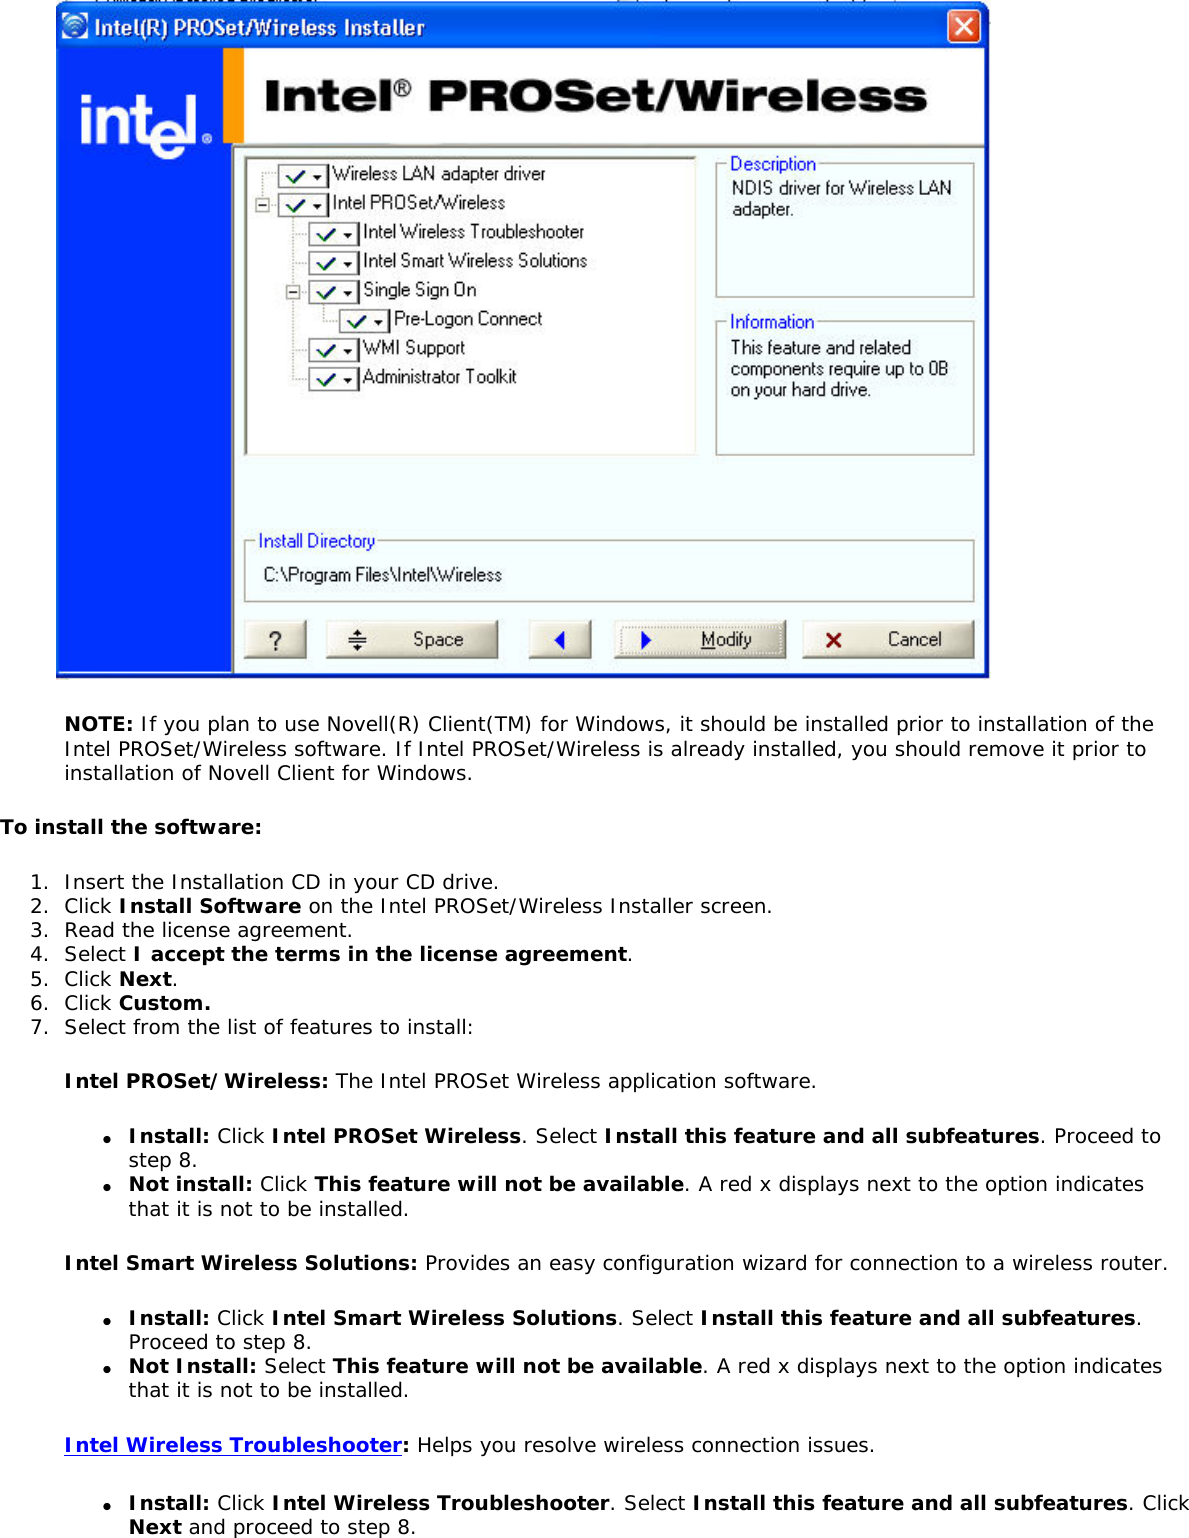  NOTE: If you plan to use Novell(R) Client(TM) for Windows, it should be installed prior to installation of the Intel PROSet/Wireless software. If Intel PROSet/Wireless is already installed, you should remove it prior to installation of Novell Client for Windows. To install the software:1.  Insert the Installation CD in your CD drive. 2.  Click Install Software on the Intel PROSet/Wireless Installer screen.3.  Read the license agreement. 4.  Select I accept the terms in the license agreement.5.  Click Next.6.  Click Custom.7.  Select from the list of features to install:Intel PROSet/Wireless: The Intel PROSet Wireless application software. ●     Install: Click Intel PROSet Wireless. Select Install this feature and all subfeatures. Proceed to step 8. ●     Not install: Click This feature will not be available. A red x displays next to the option indicates that it is not to be installed.Intel Smart Wireless Solutions: Provides an easy configuration wizard for connection to a wireless router. ●     Install: Click Intel Smart Wireless Solutions. Select Install this feature and all subfeatures. Proceed to step 8. ●     Not Install: Select This feature will not be available. A red x displays next to the option indicates that it is not to be installed. Intel Wireless Troubleshooter: Helps you resolve wireless connection issues. ●     Install: Click Intel Wireless Troubleshooter. Select Install this feature and all subfeatures. Click Next and proceed to step 8. 